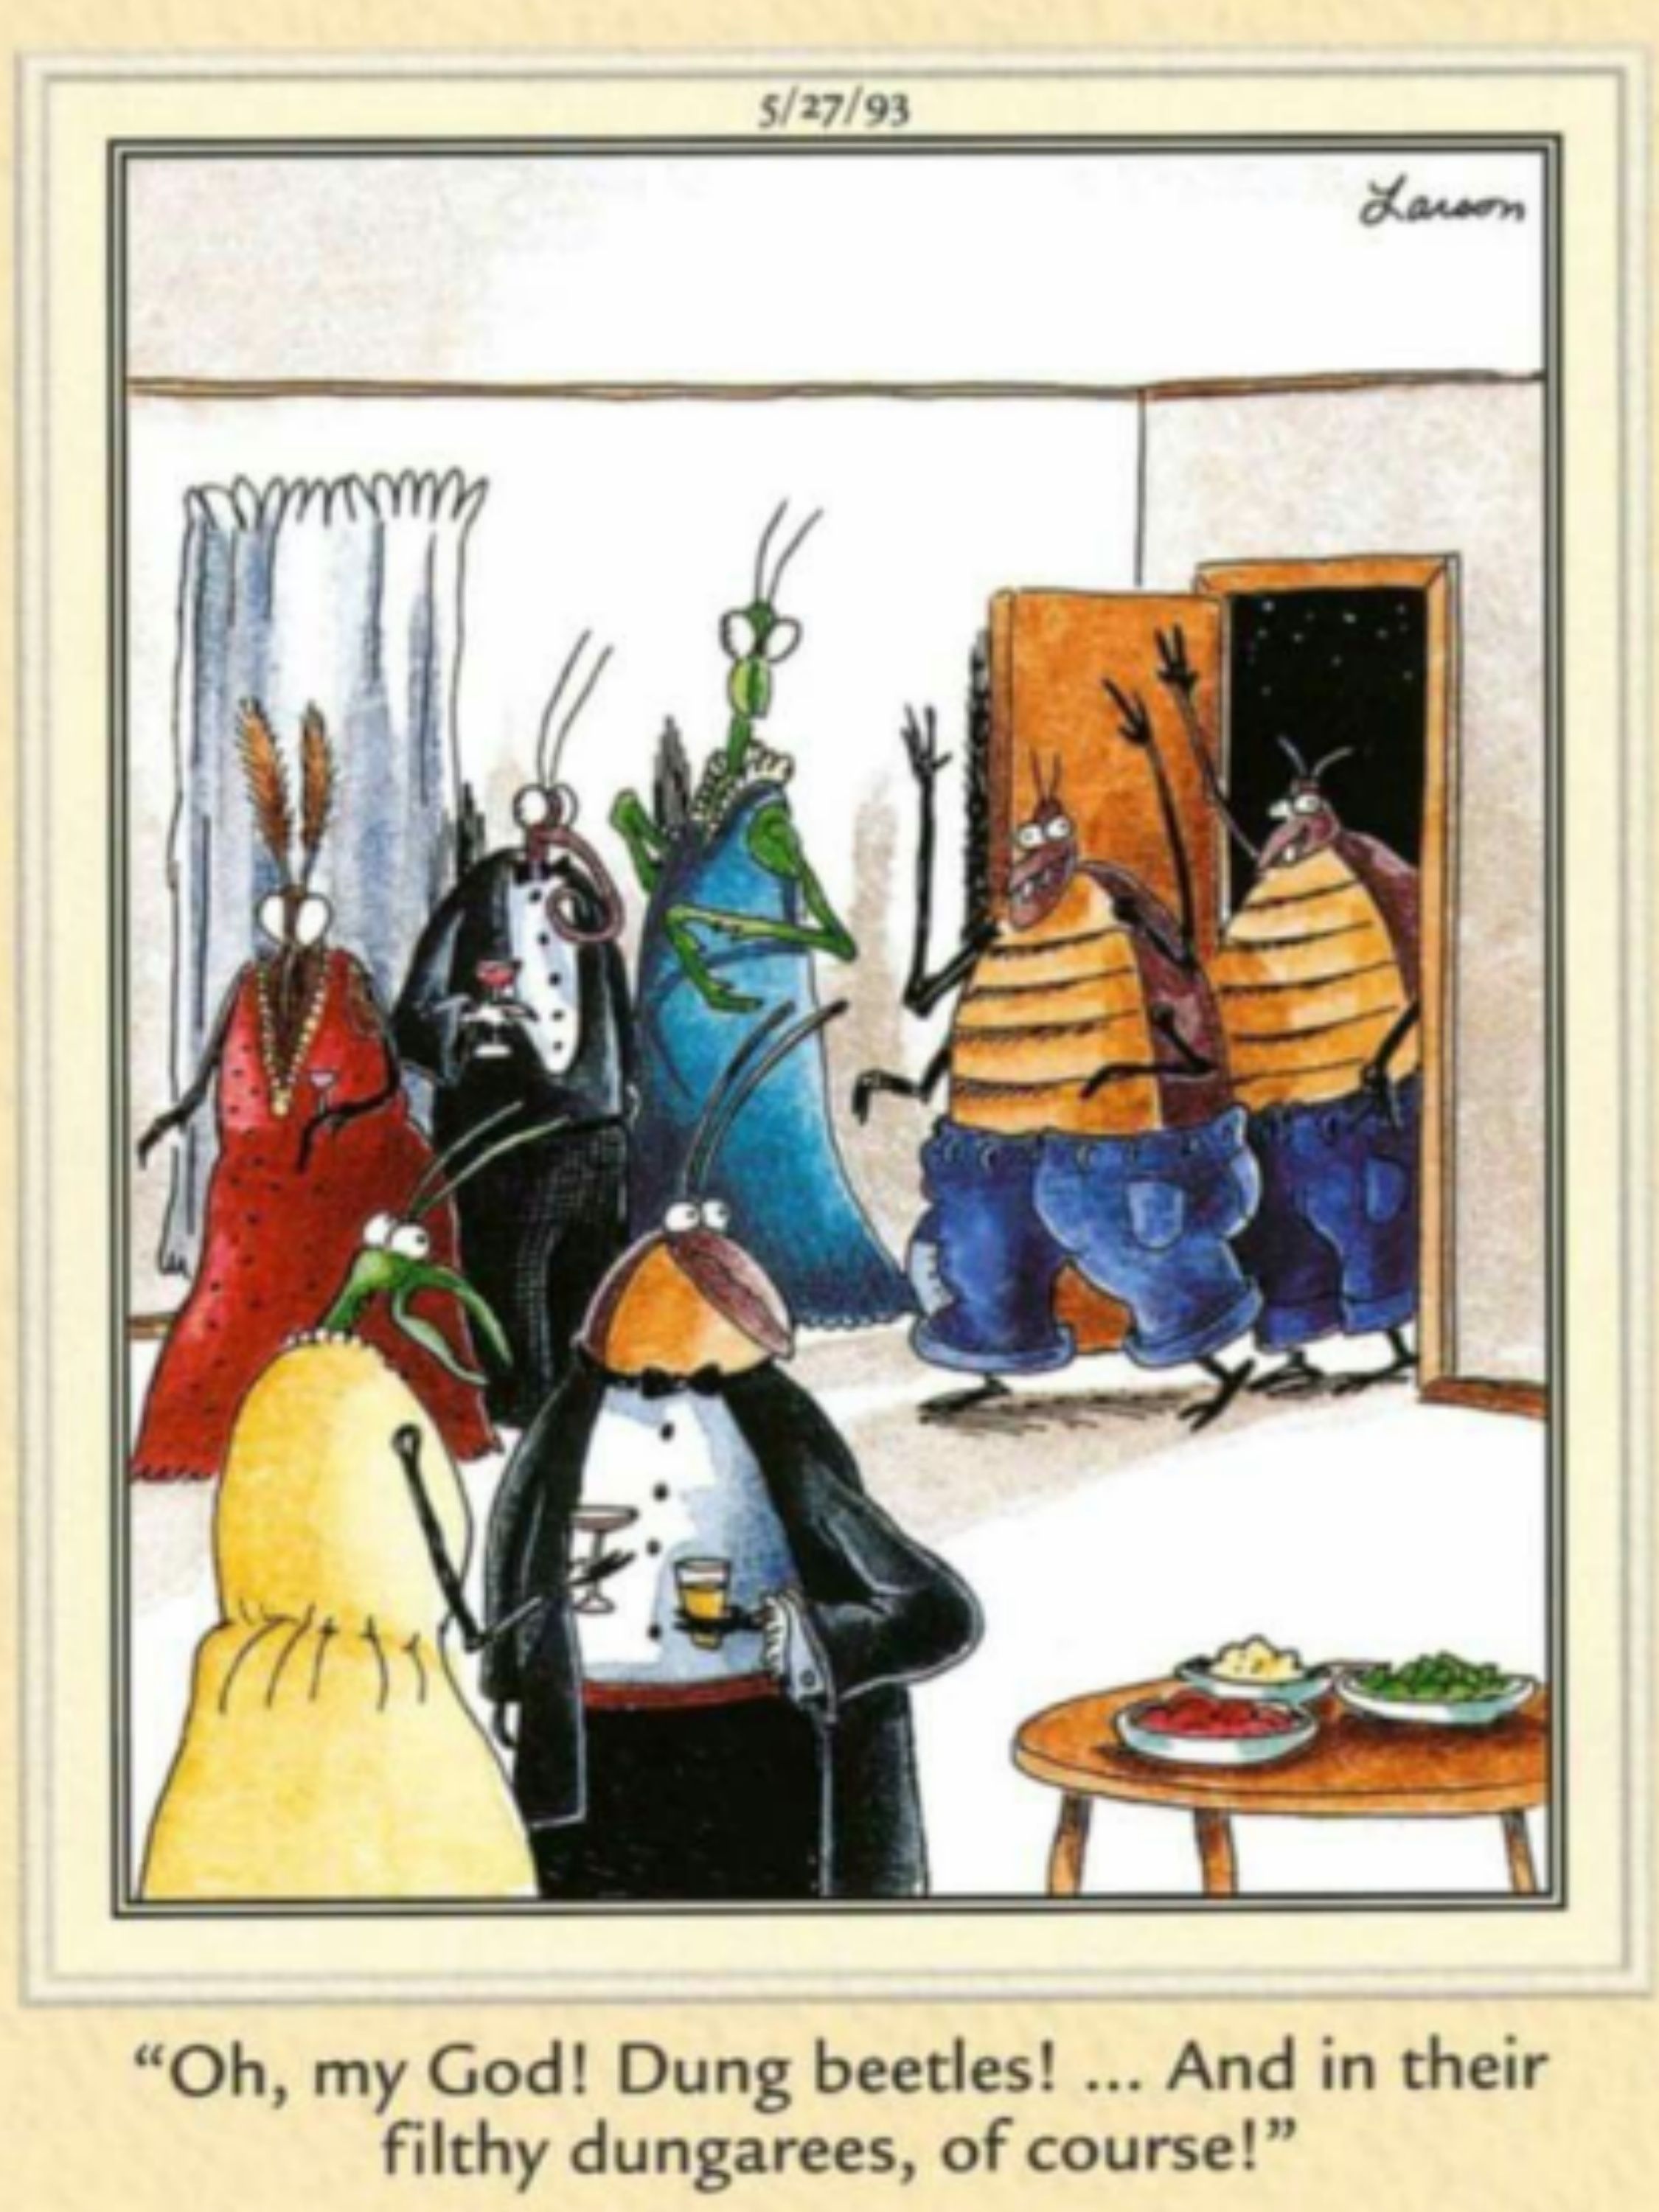 Dung beetles entering a fancy party in Far Side.